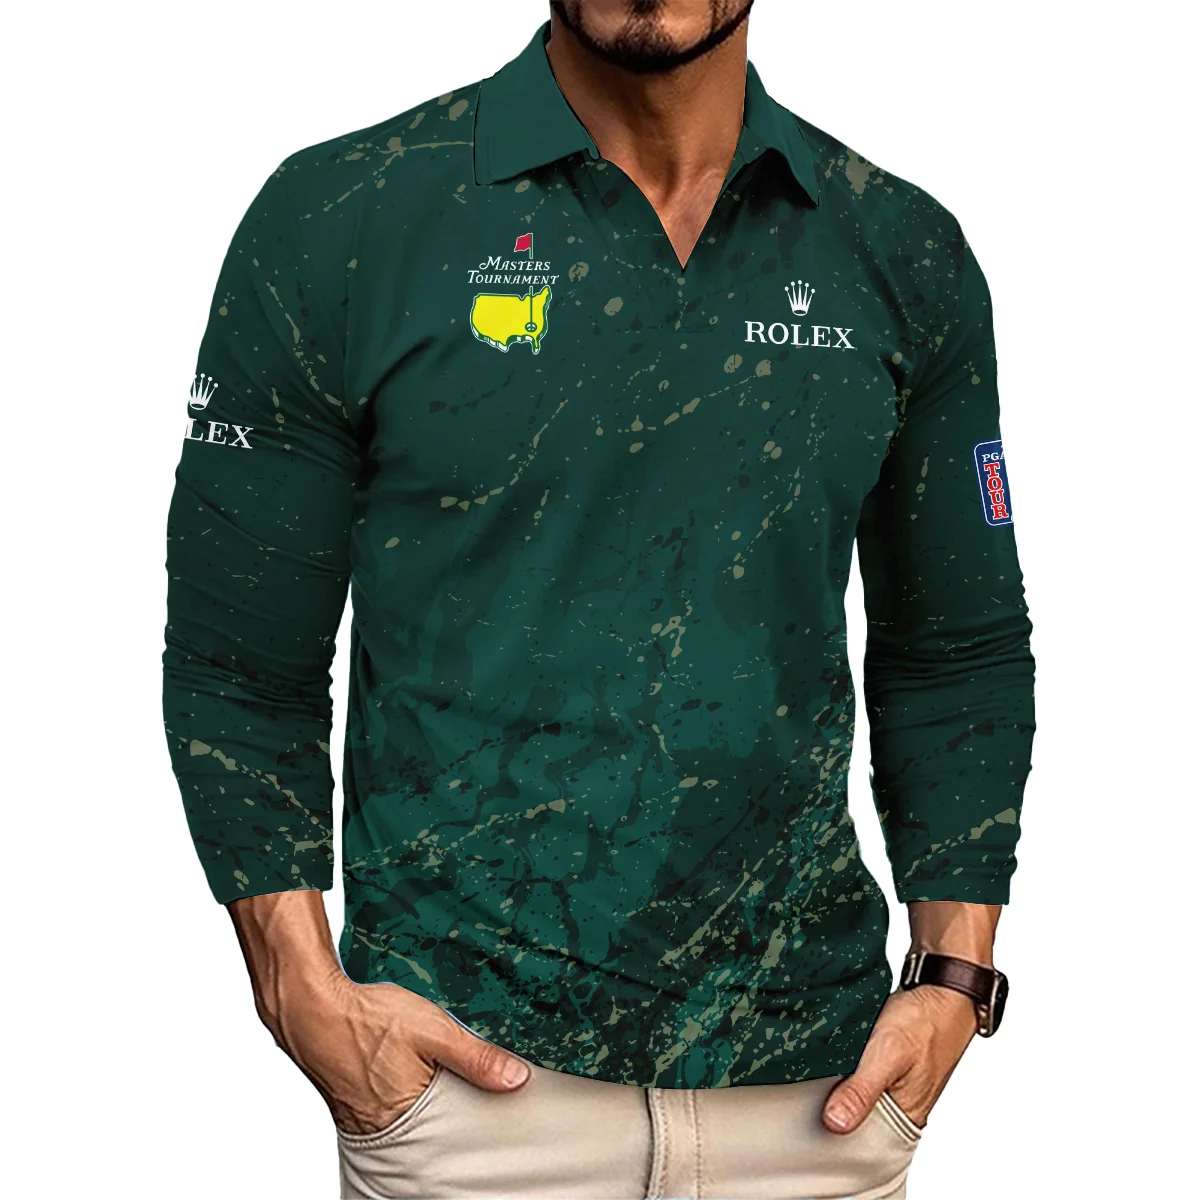 Old Cracked Texture With Gold Splash Paint Masters Tournament Rolex Vneck Long Polo Shirt Style Classic Long Polo Shirt For Men